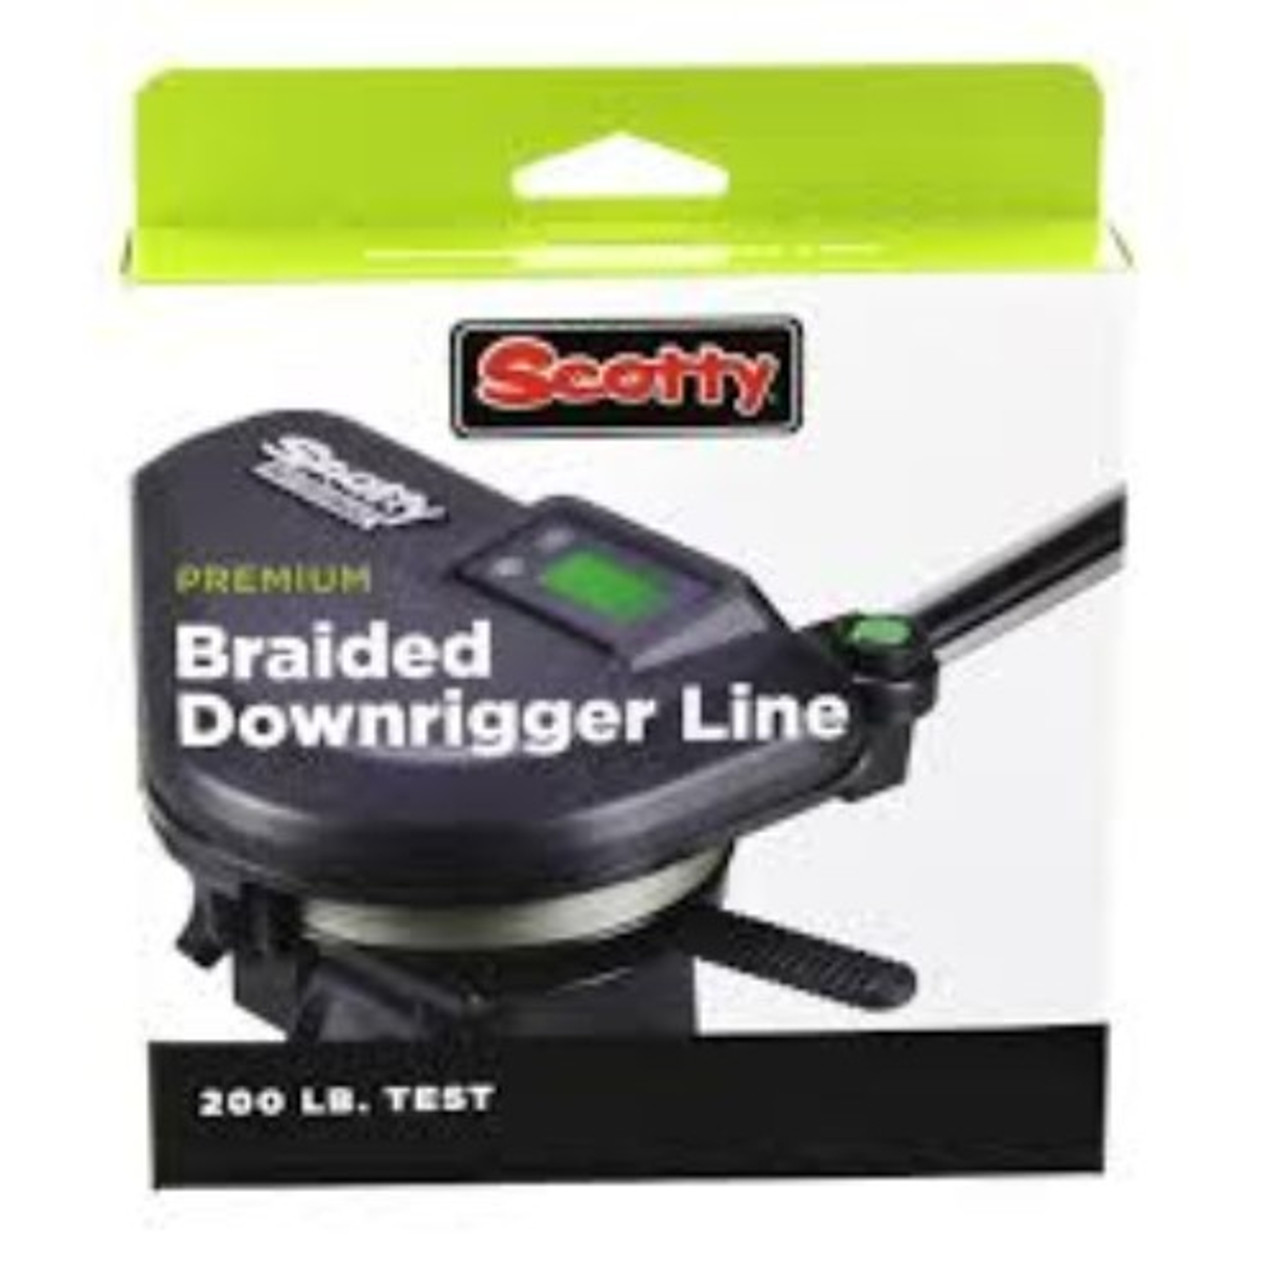 SCOTTY - Braided Downrigger Line (200 lb test) - The Harbour Chandler